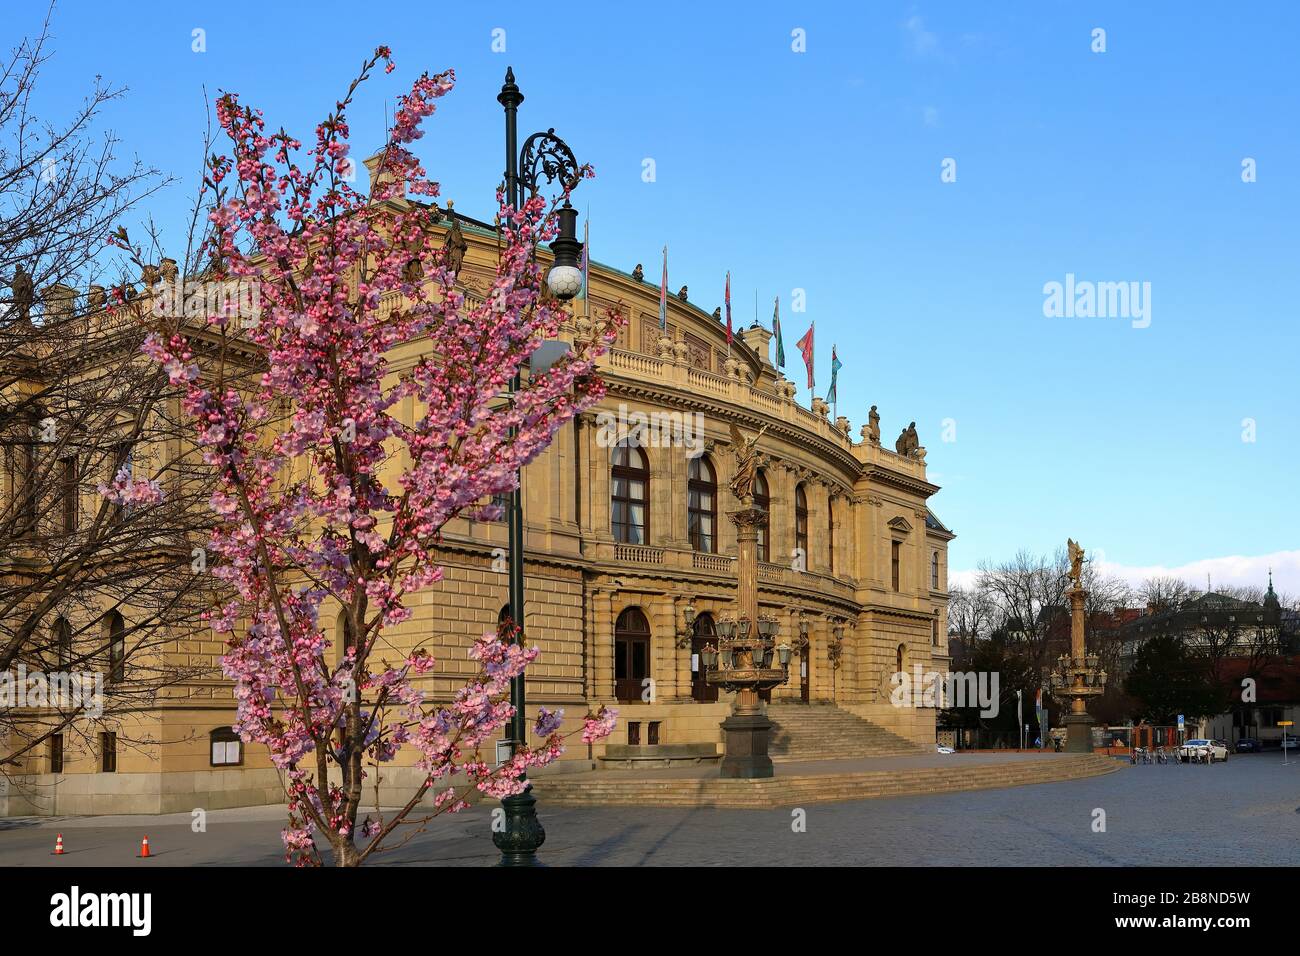 Czech Republic, Prague, On 22th March, 2020. The Rudolfinum - concert and exhibition hall during the pandemic. Stock Photo